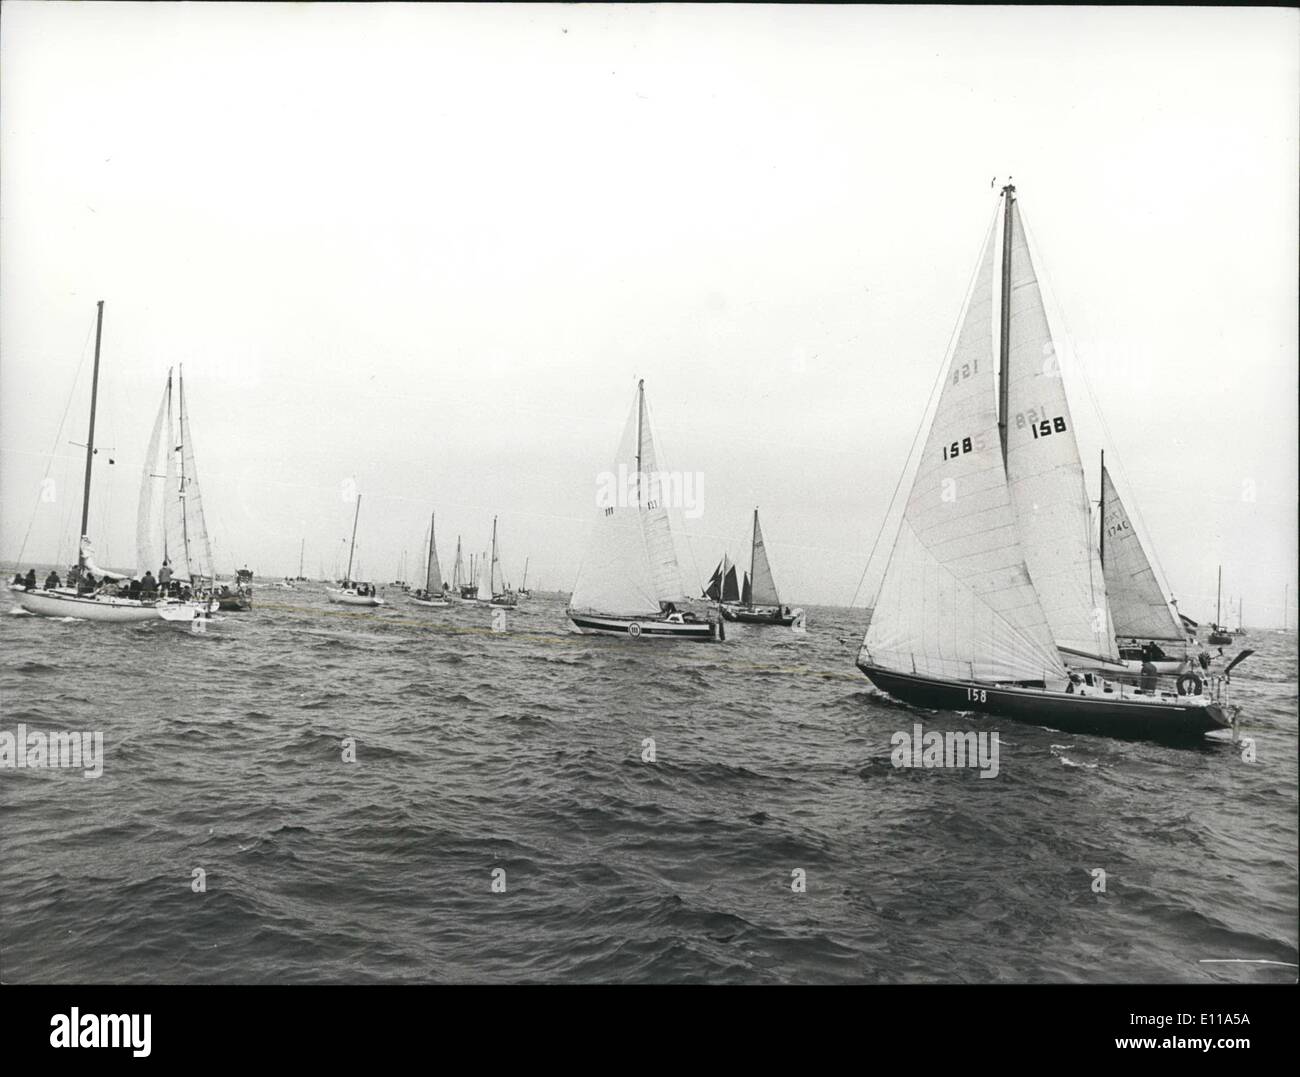 Jun. 06, 1976 - The start of the fifth single handed translating yacht race. The most spectacular fleet of one man yachts started out from Plymouth of Saturday ,June 5th, for the fifth Observer single handed Transatlantic race of 3,000 miles to Newport, Rhode Island. There were 125 yachts competing in the race. Stock Photo